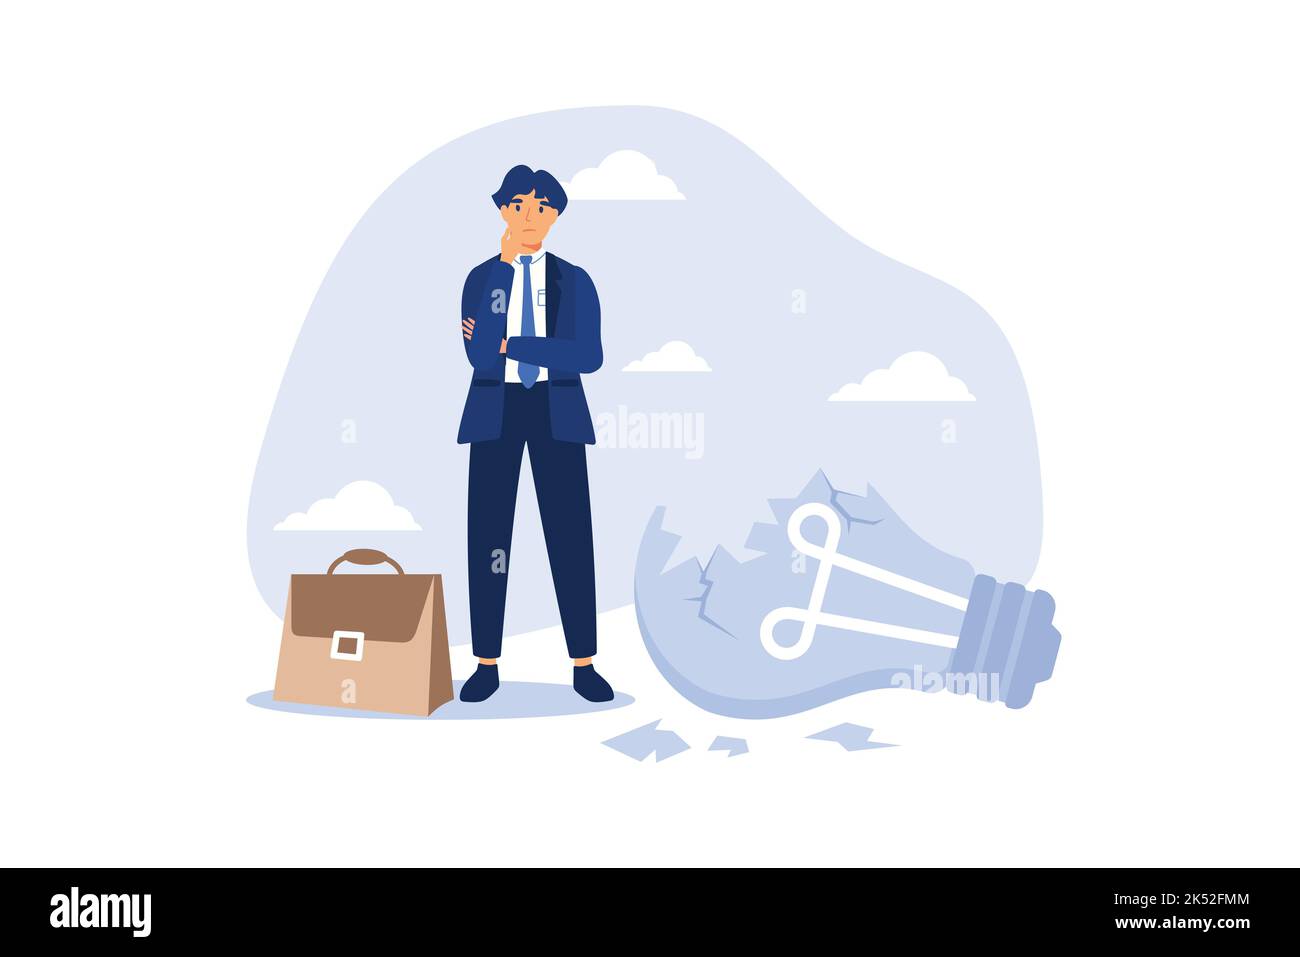 Uninspired or motivation after business failure, burnout or exhausted from crisis, no new idea or inspiration concept, depressed business man sadly st Stock Vector